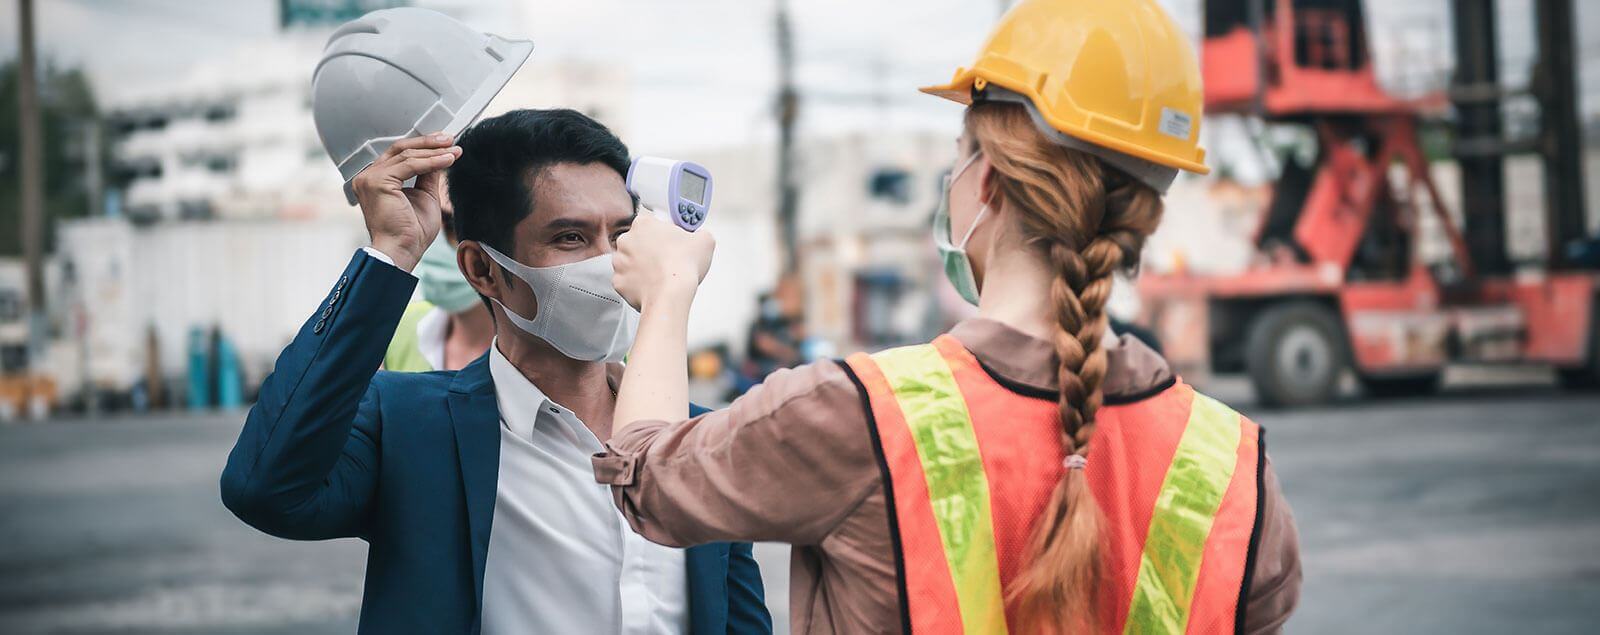 Lady in hardhat and hi-vis taking the temperature of man in suit and hardhat